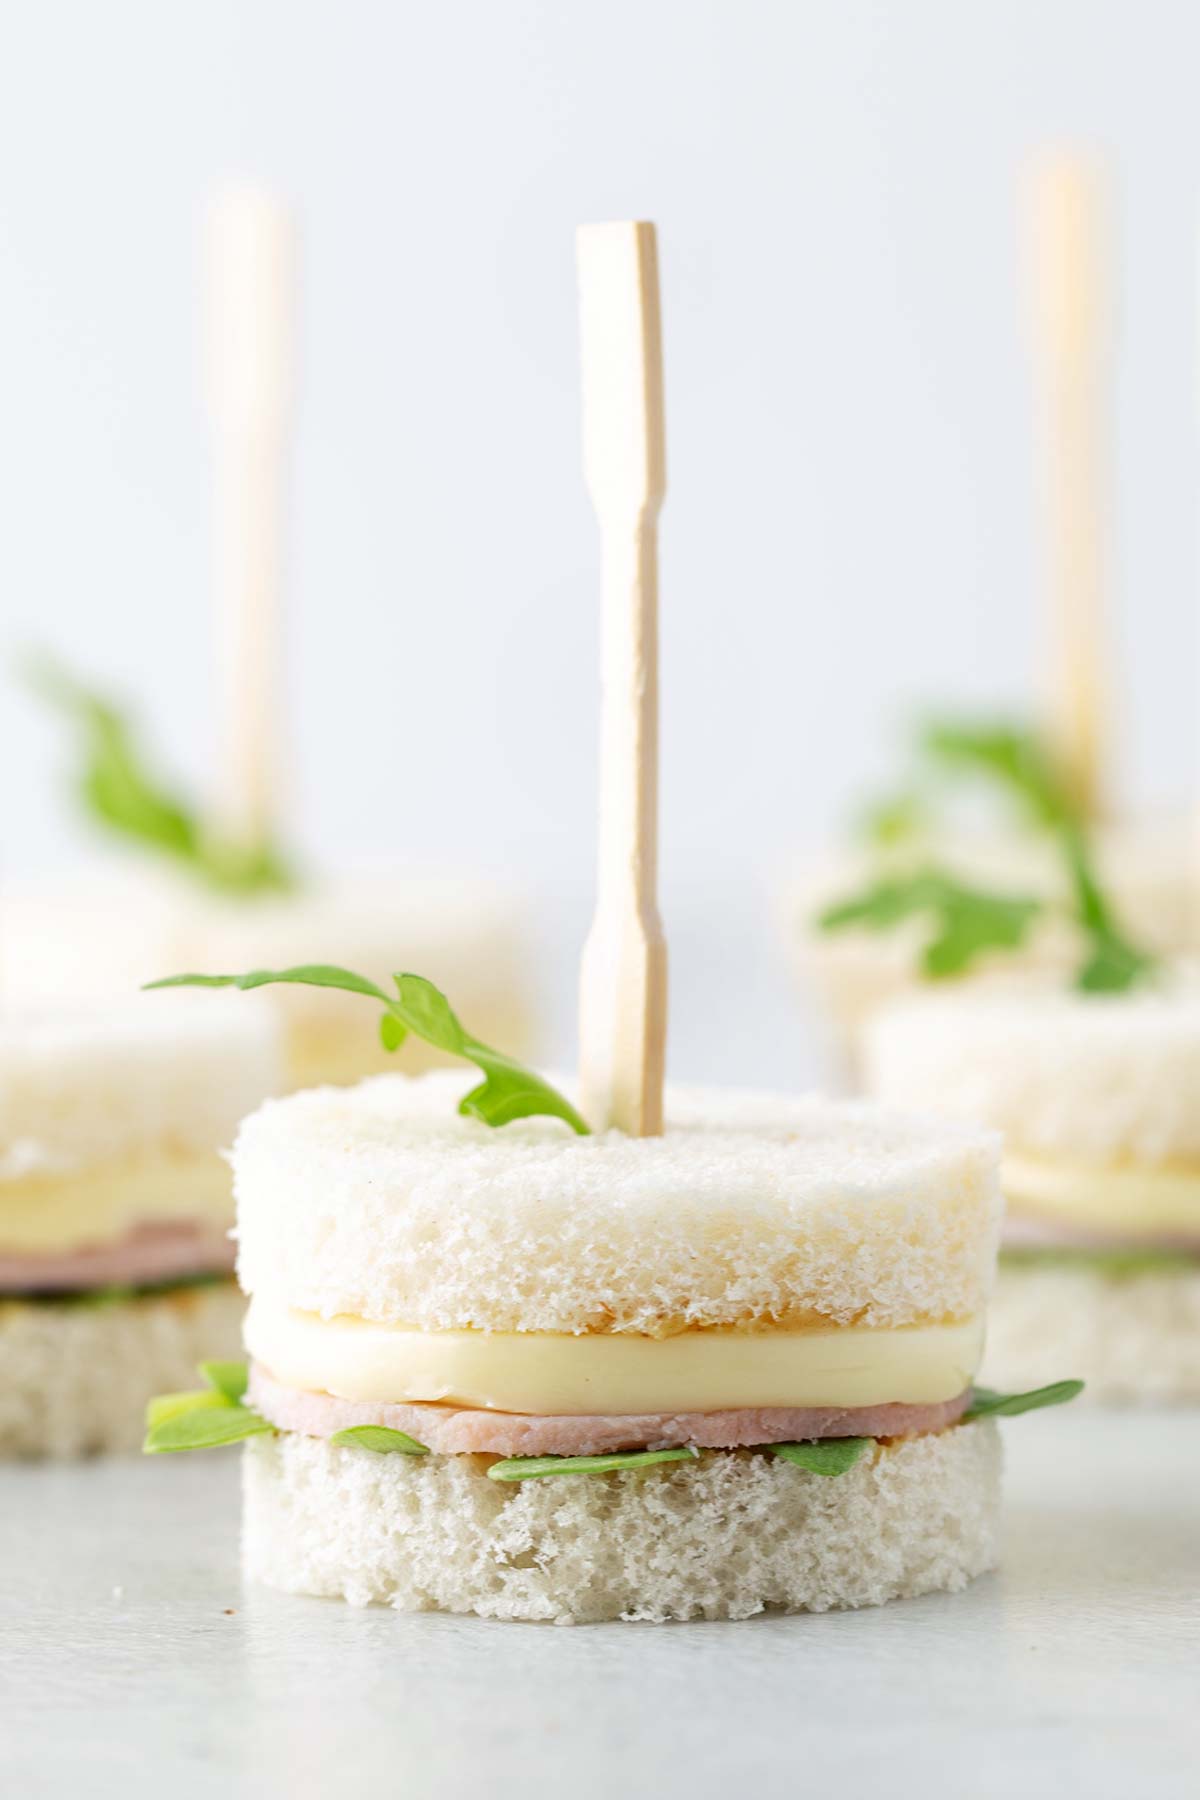 Tea Party Sandwiches - Ham and Brie Cheese